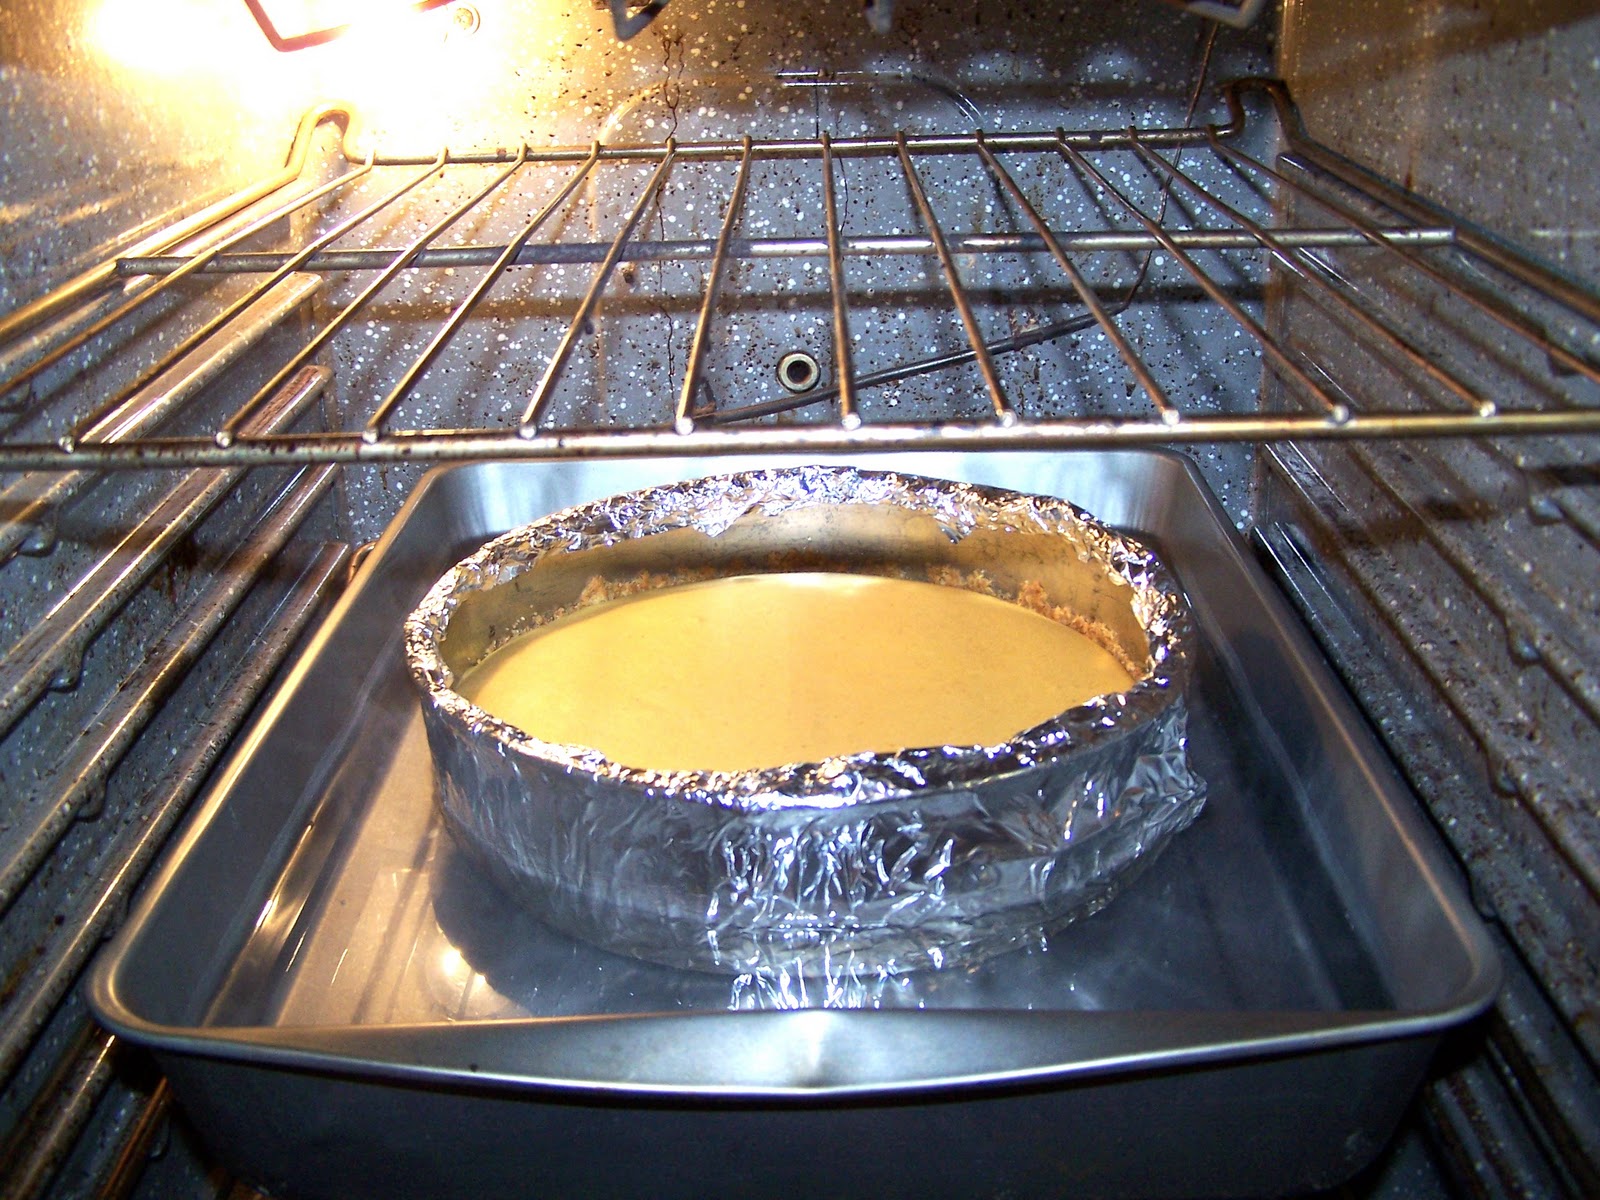 How to Make A Water Bath for Cheesecake - Handle the Heat